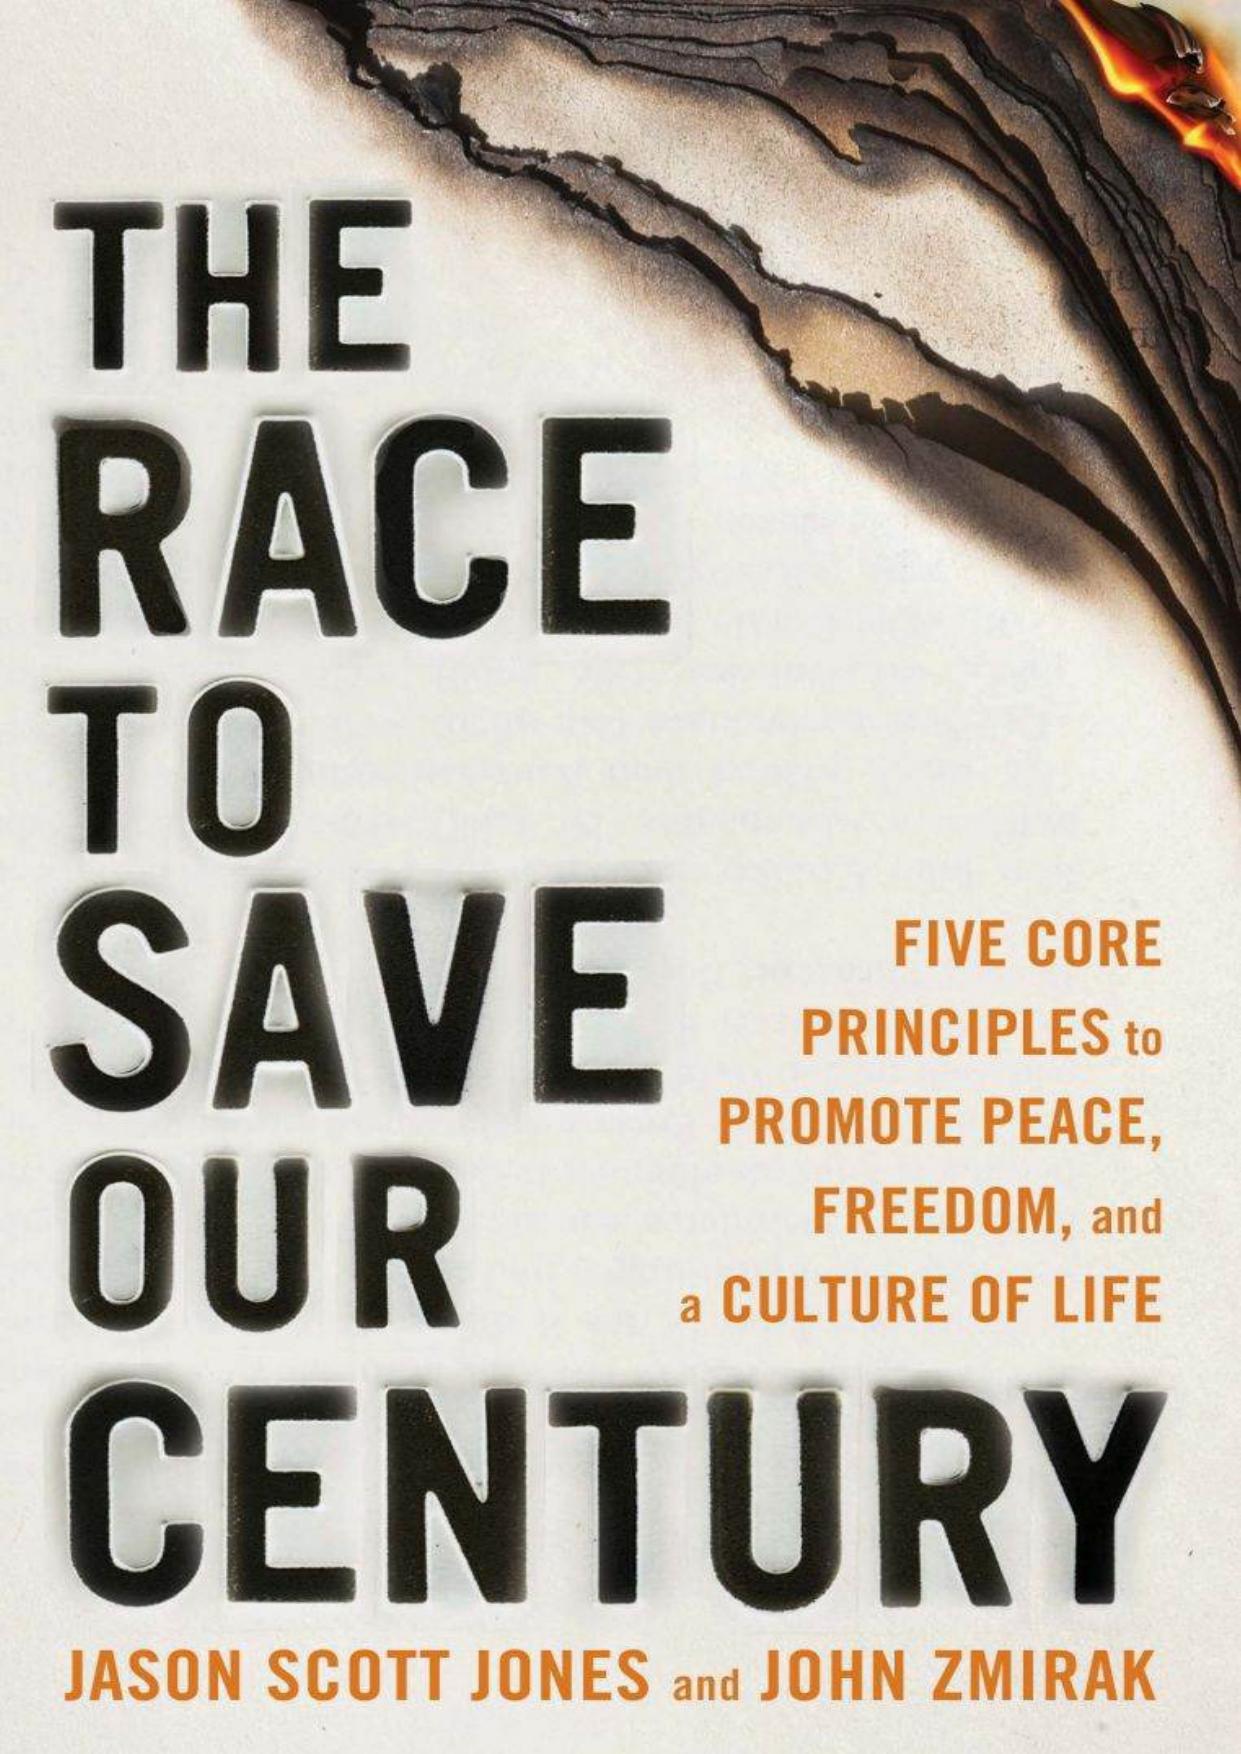 The Race to Save Our Century: Five Core Principles to Promote Peace, Freedom, and a Culture of Life